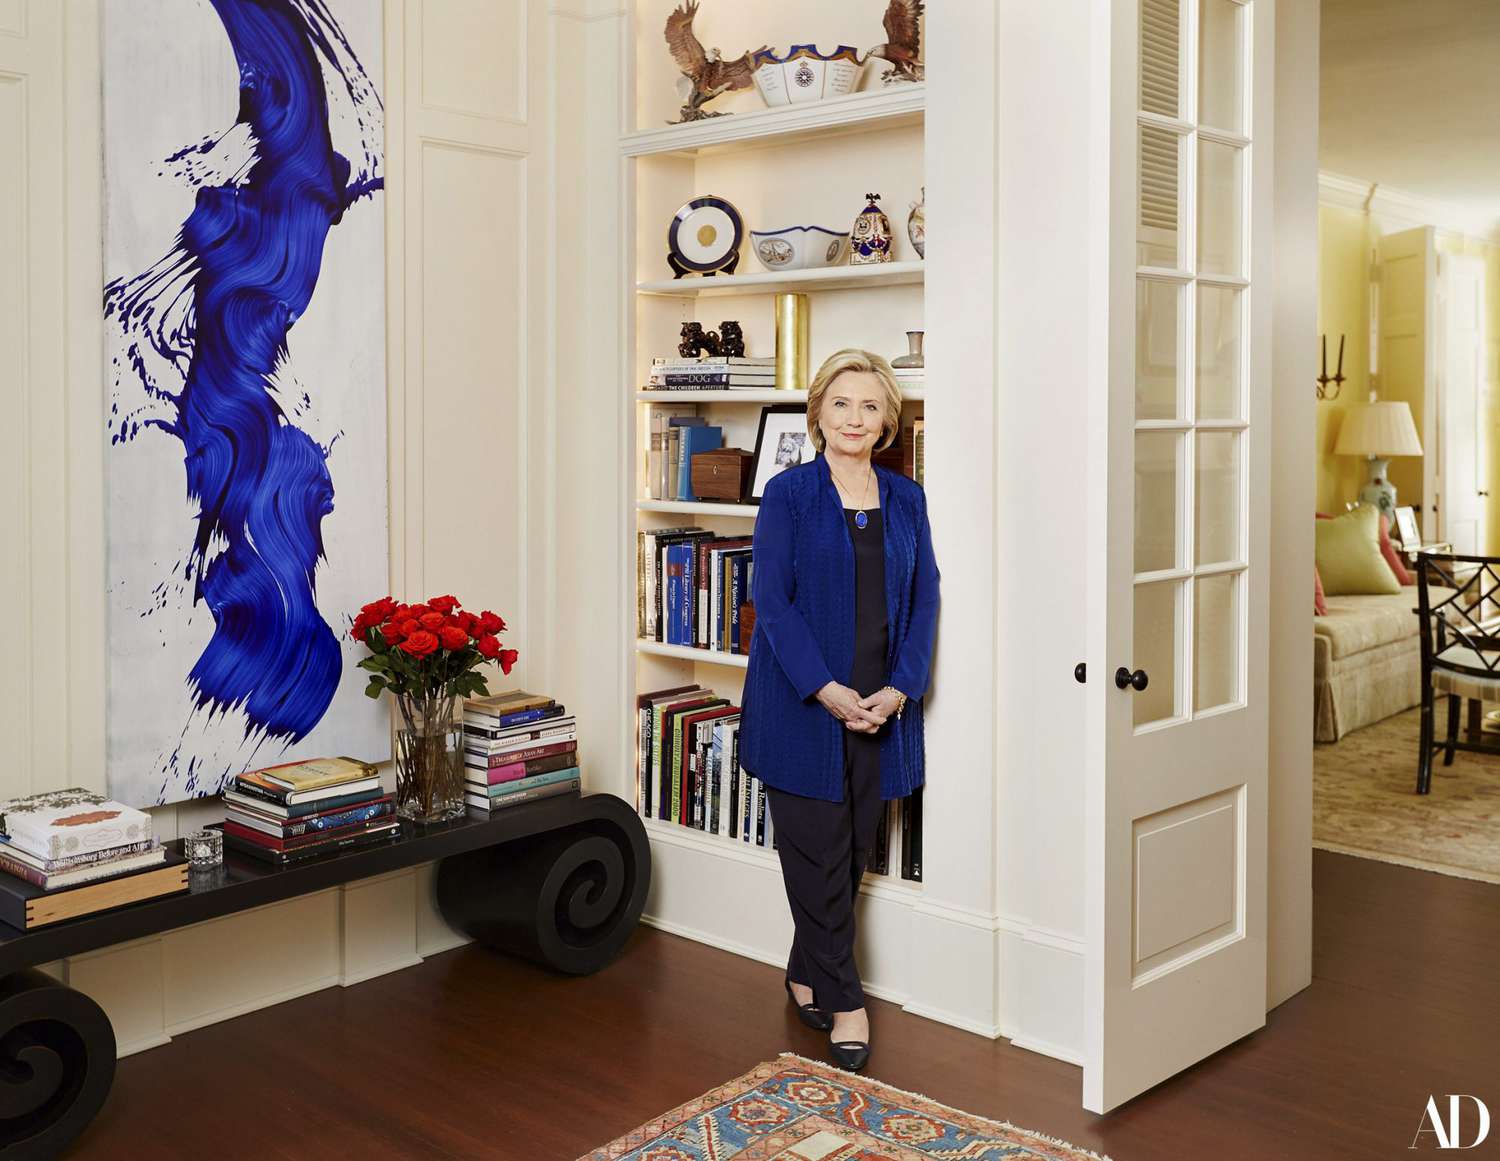 Architectural Digest Hillary Clinton's home CR: Architectural Digest